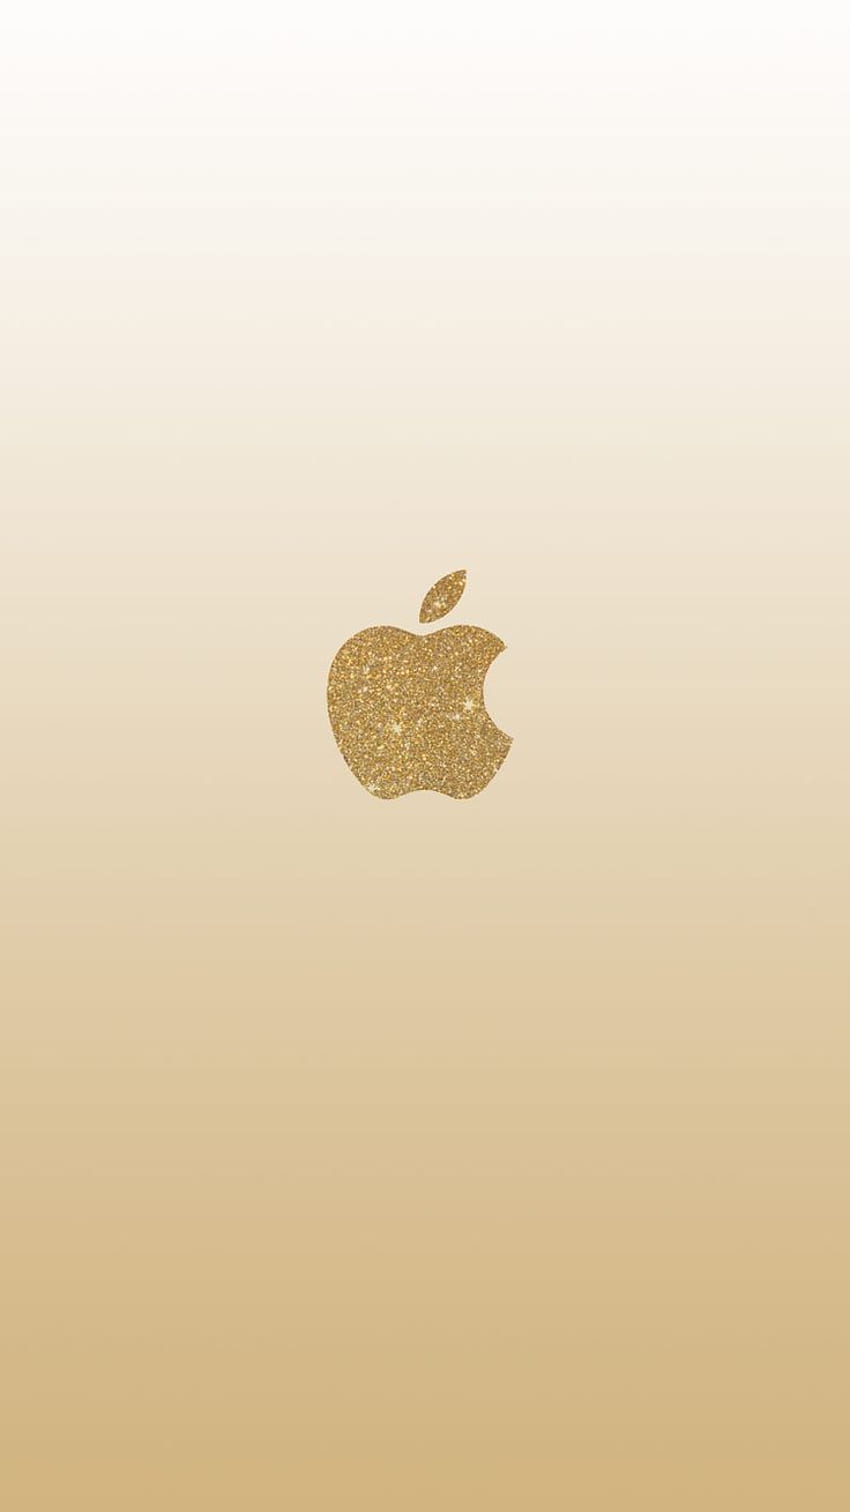 Best Apple iPhone 6 / 7 & Background. Apple logo iphone, Apple iphone, Gold iphone, Black and Gold 6 Plus HD phone wallpaper